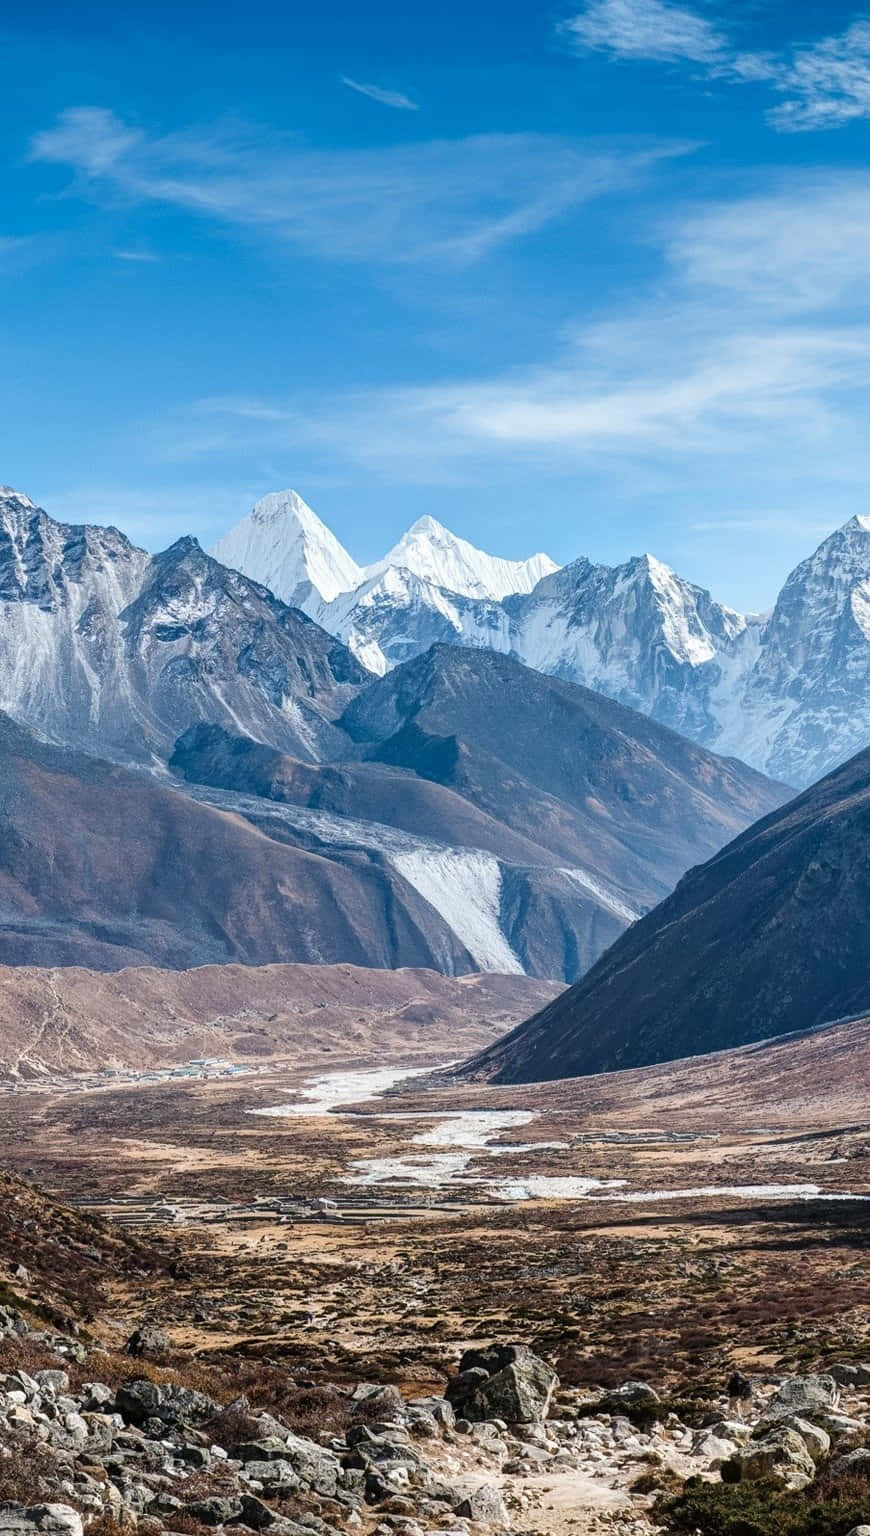 The Himalaya, the highest mountain range in the world